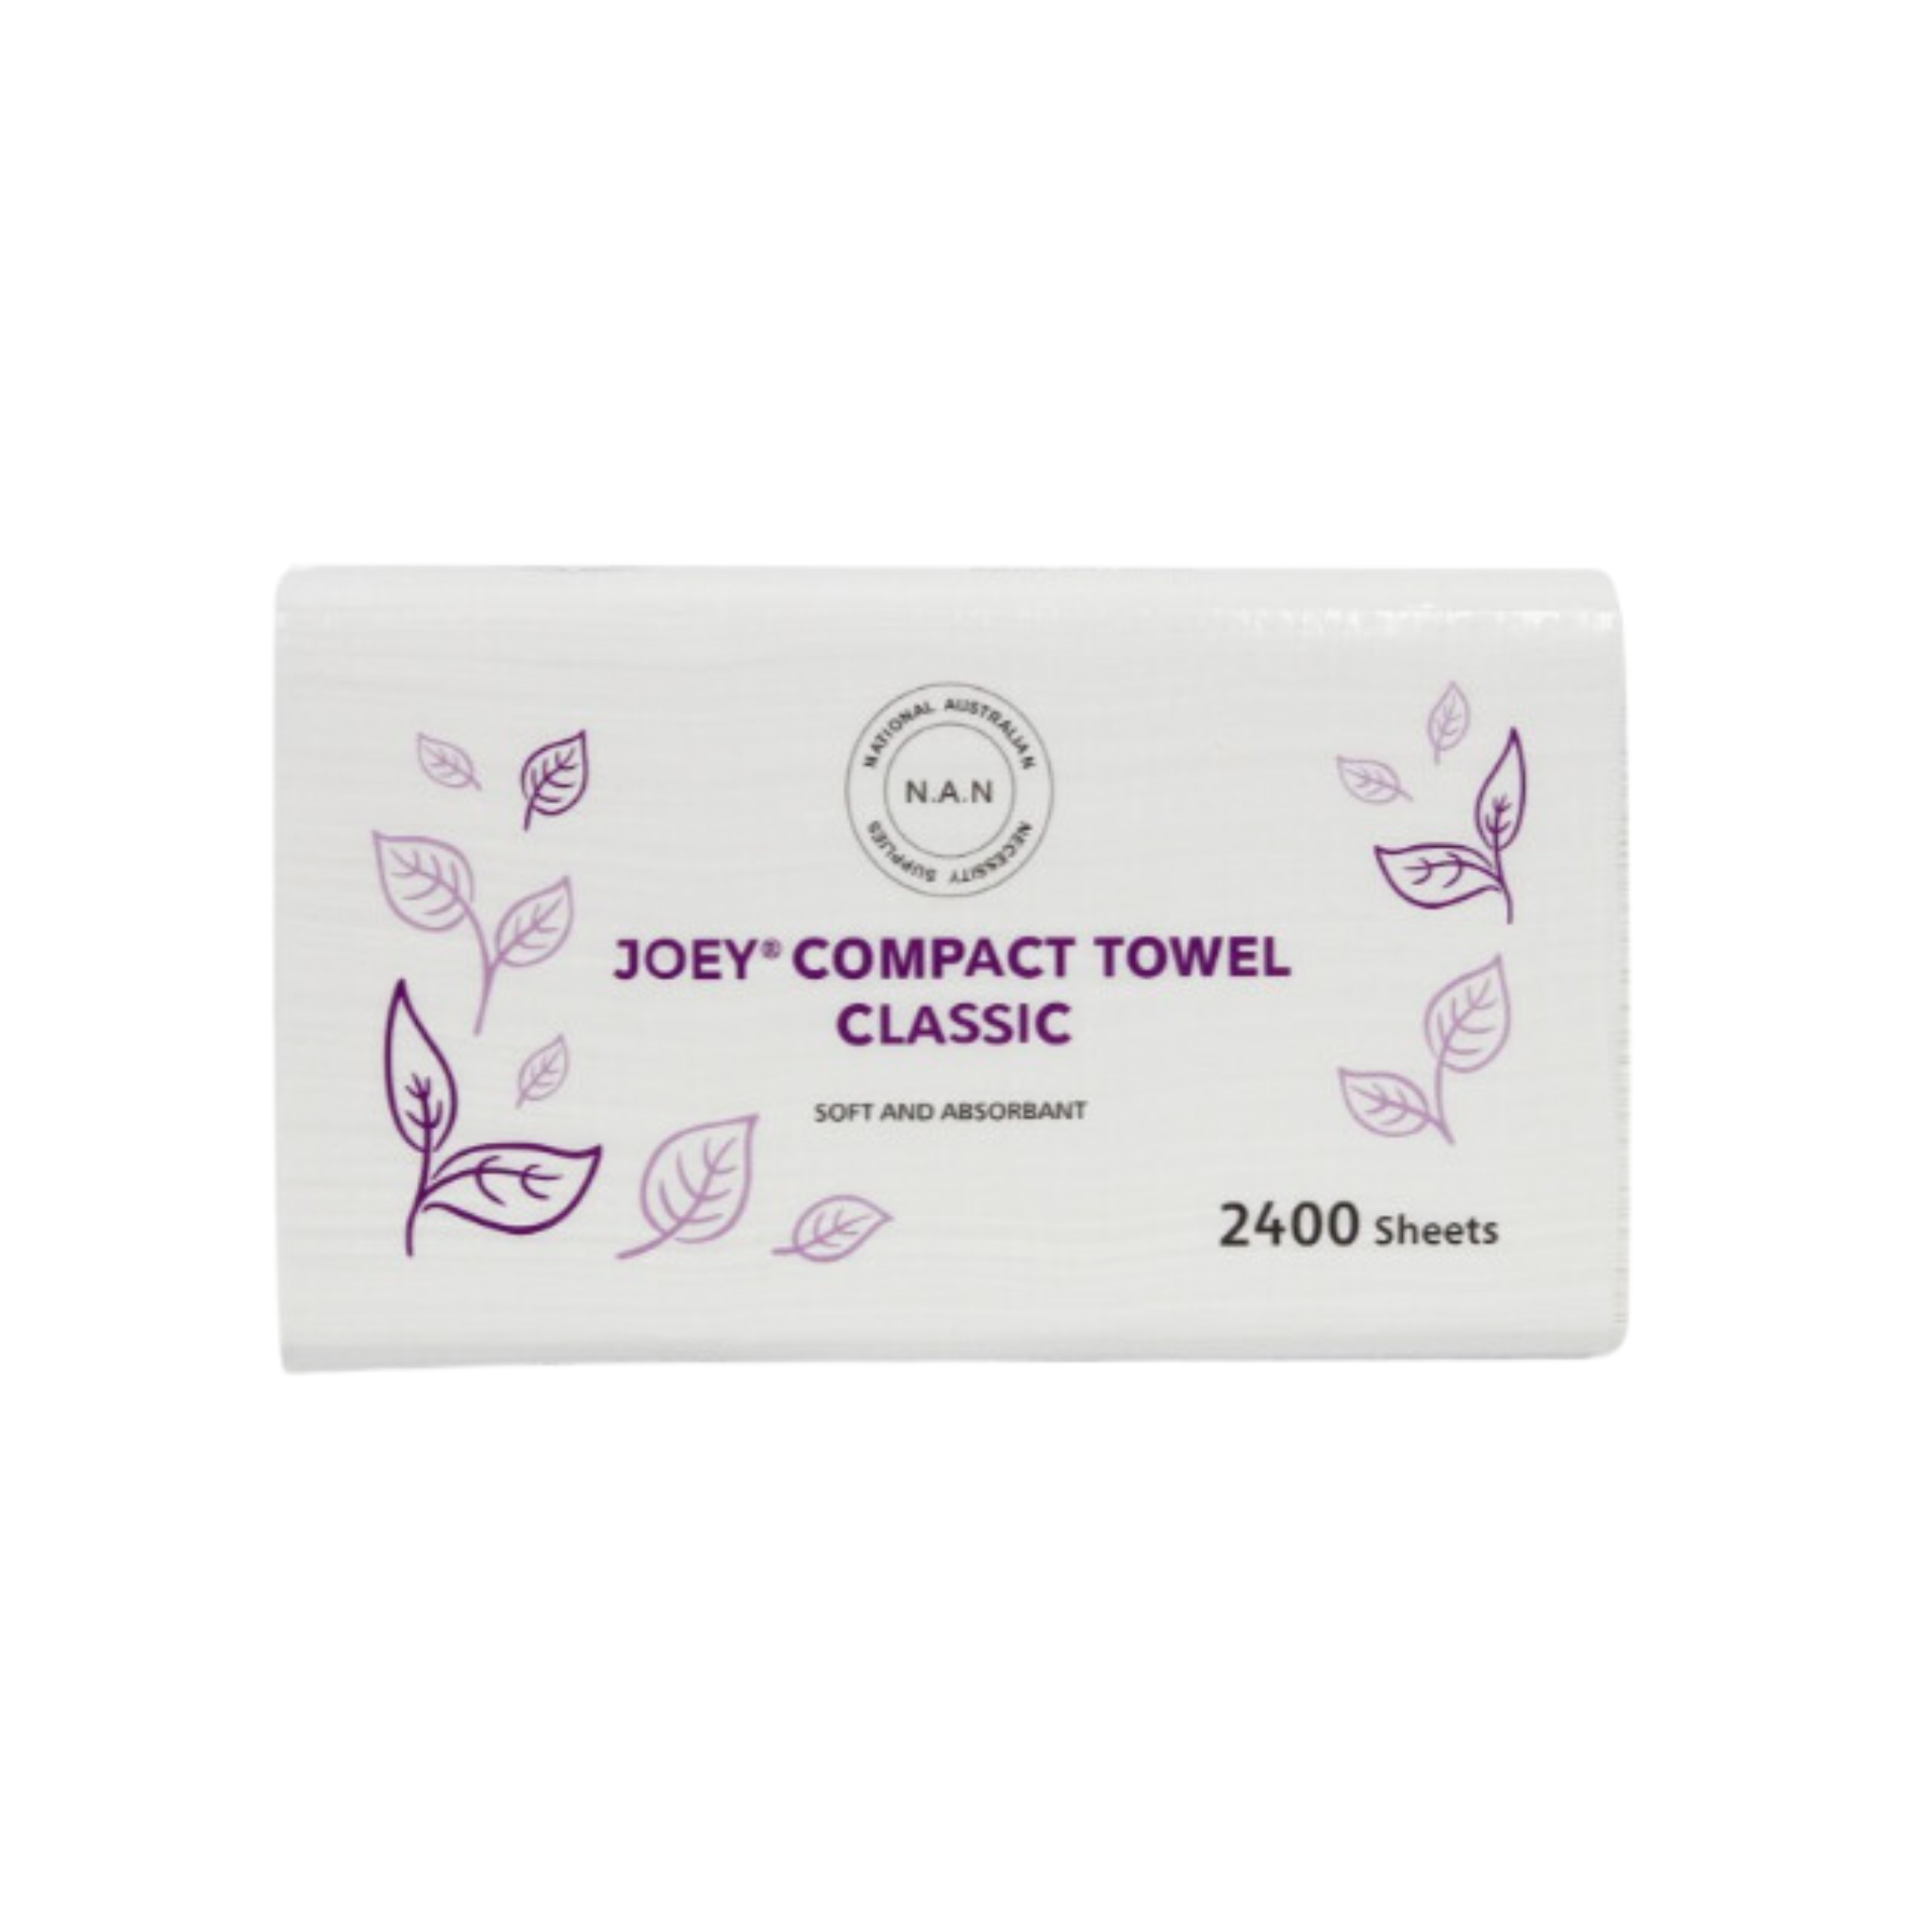 Joey Compact Classic Towel 2Ply 20x120's